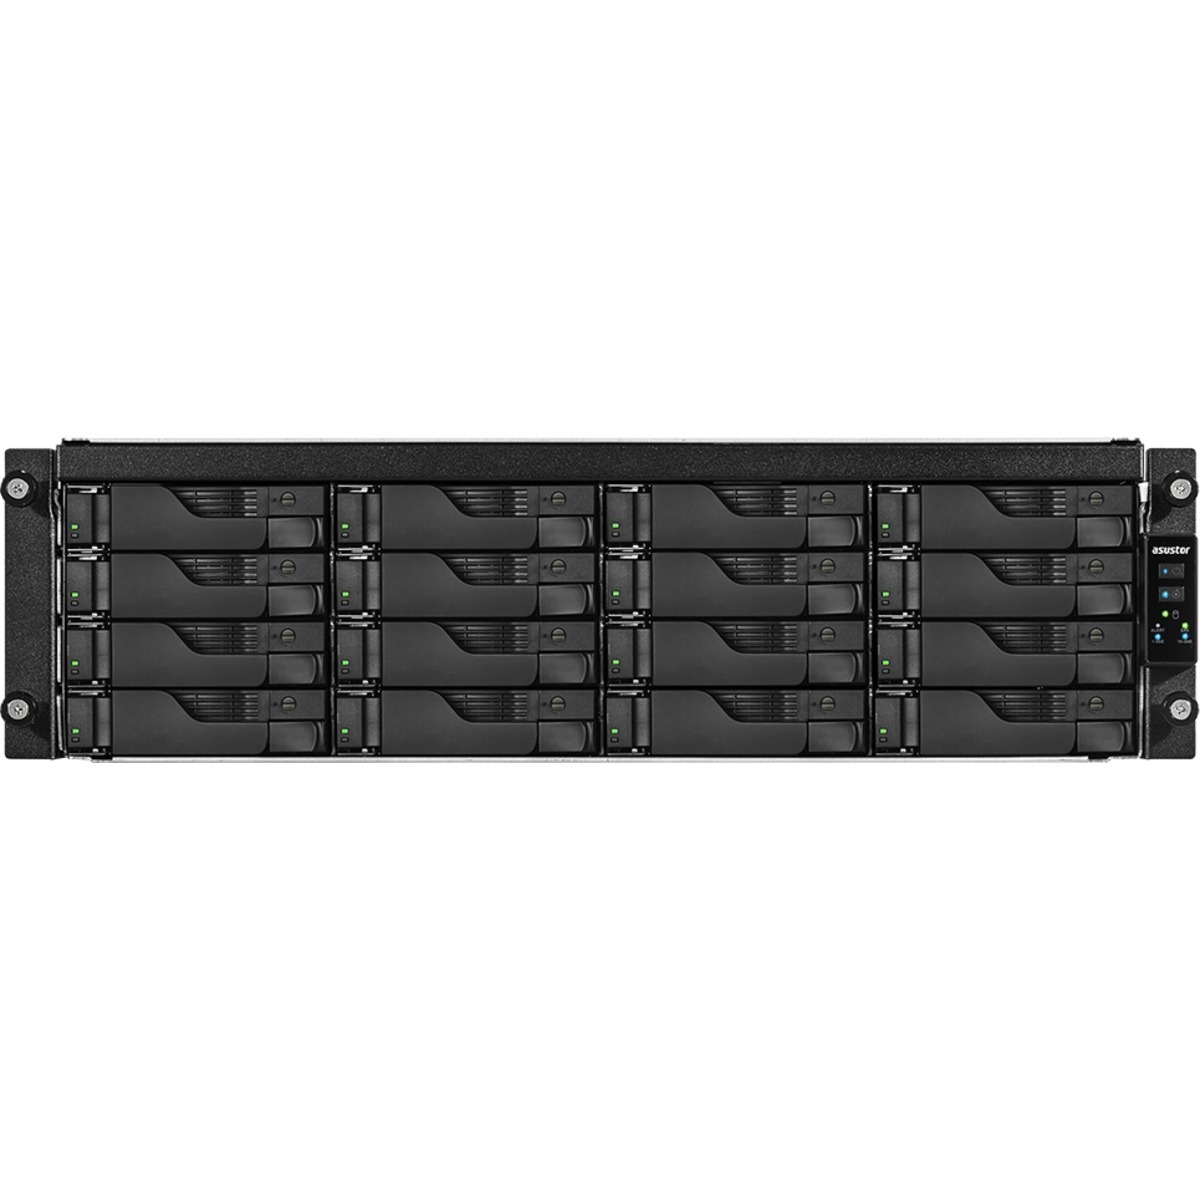 buy ASUSTOR AS7116RDX Lockerstor 16R Pro RackMount NAS - Network Attached Storage Device Burn-In Tested Configurations - nas headquarters buy network attached storage server device das new raid-5 free shipping usa AS7116RDX Lockerstor 16R Pro